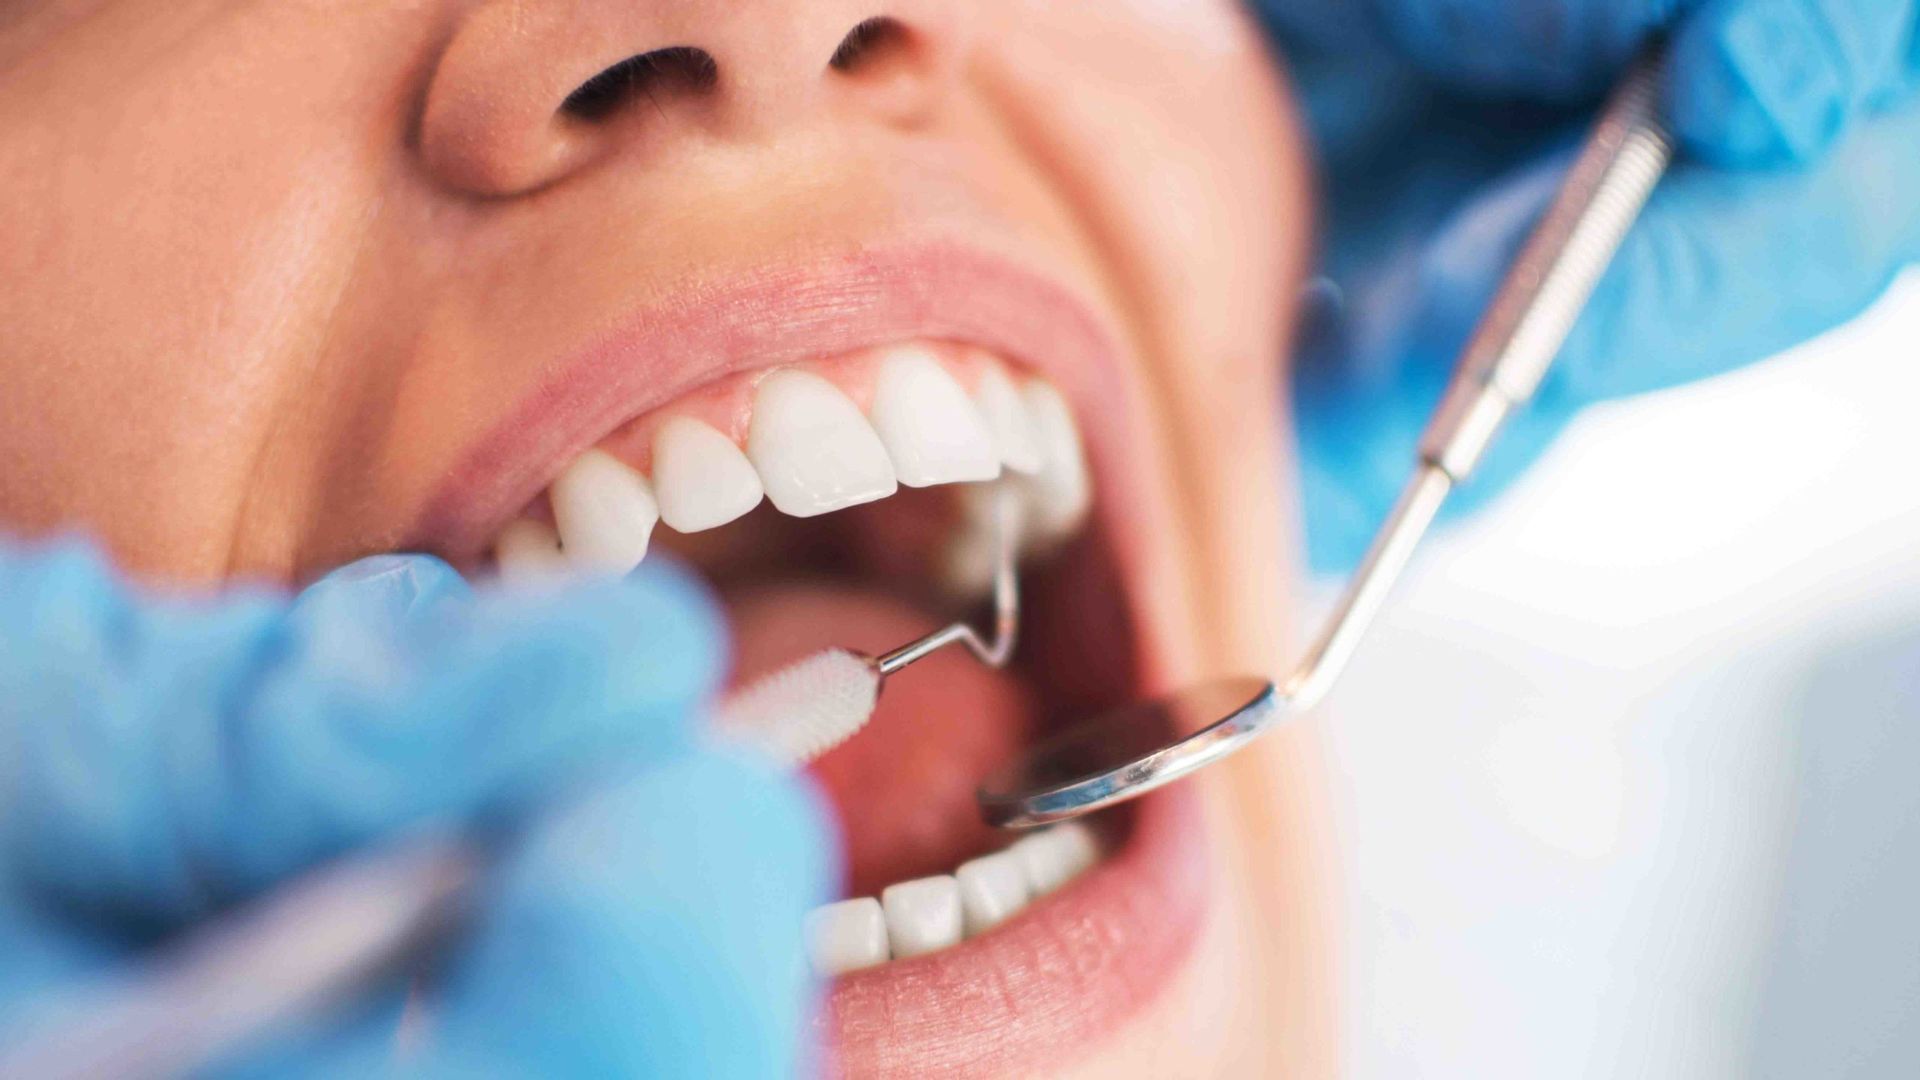 dental hygienist at work at our dental clinic in Currambine, City of Joondalup